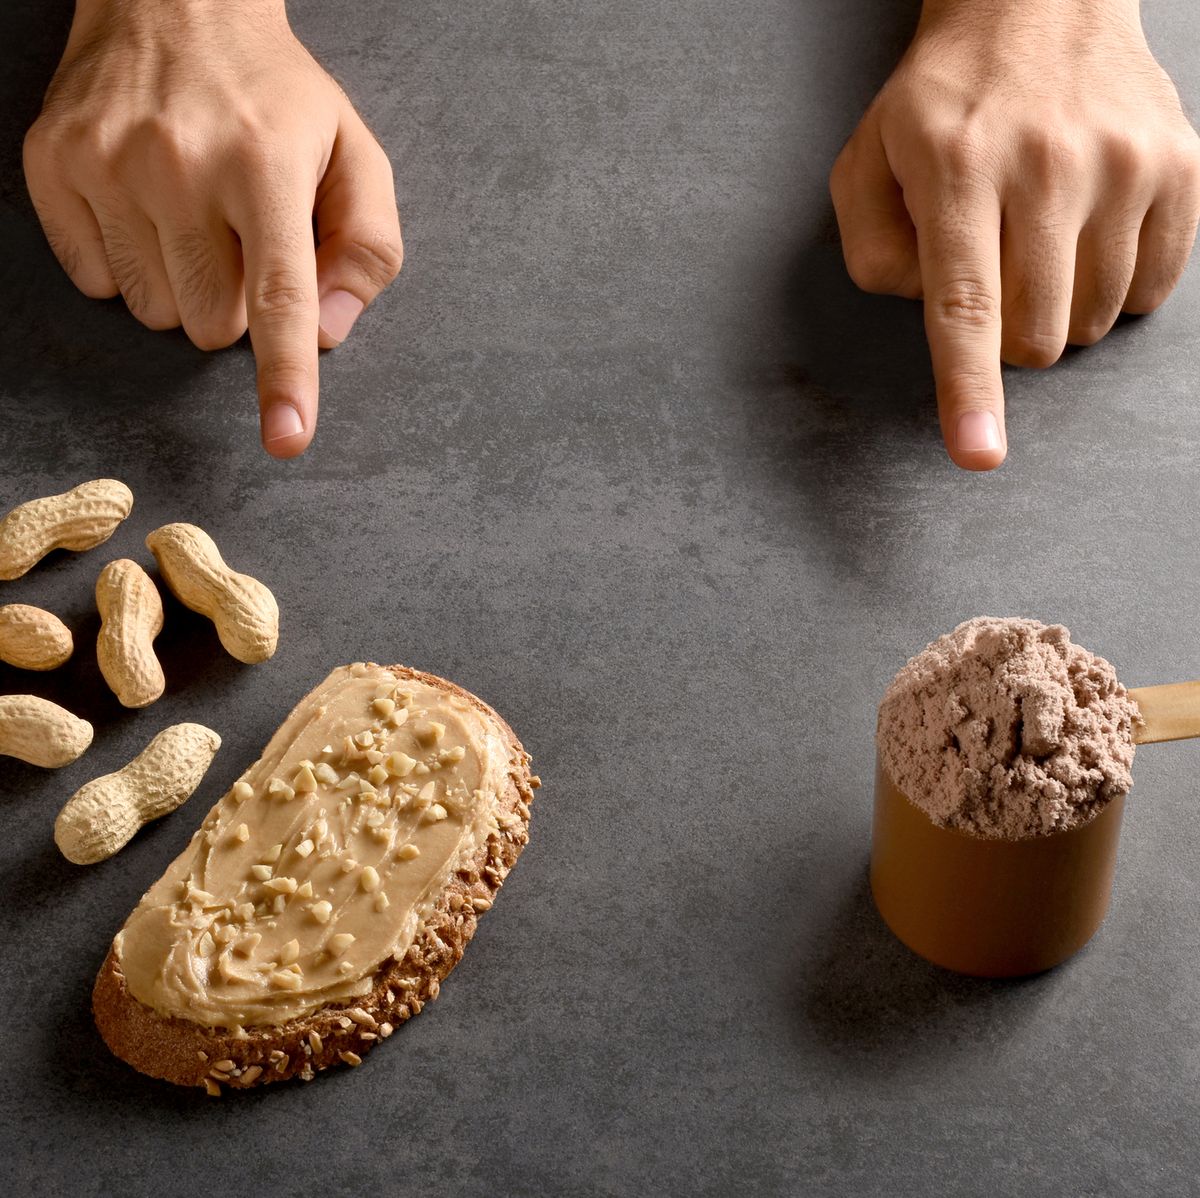 is eating peanut butter healthy?